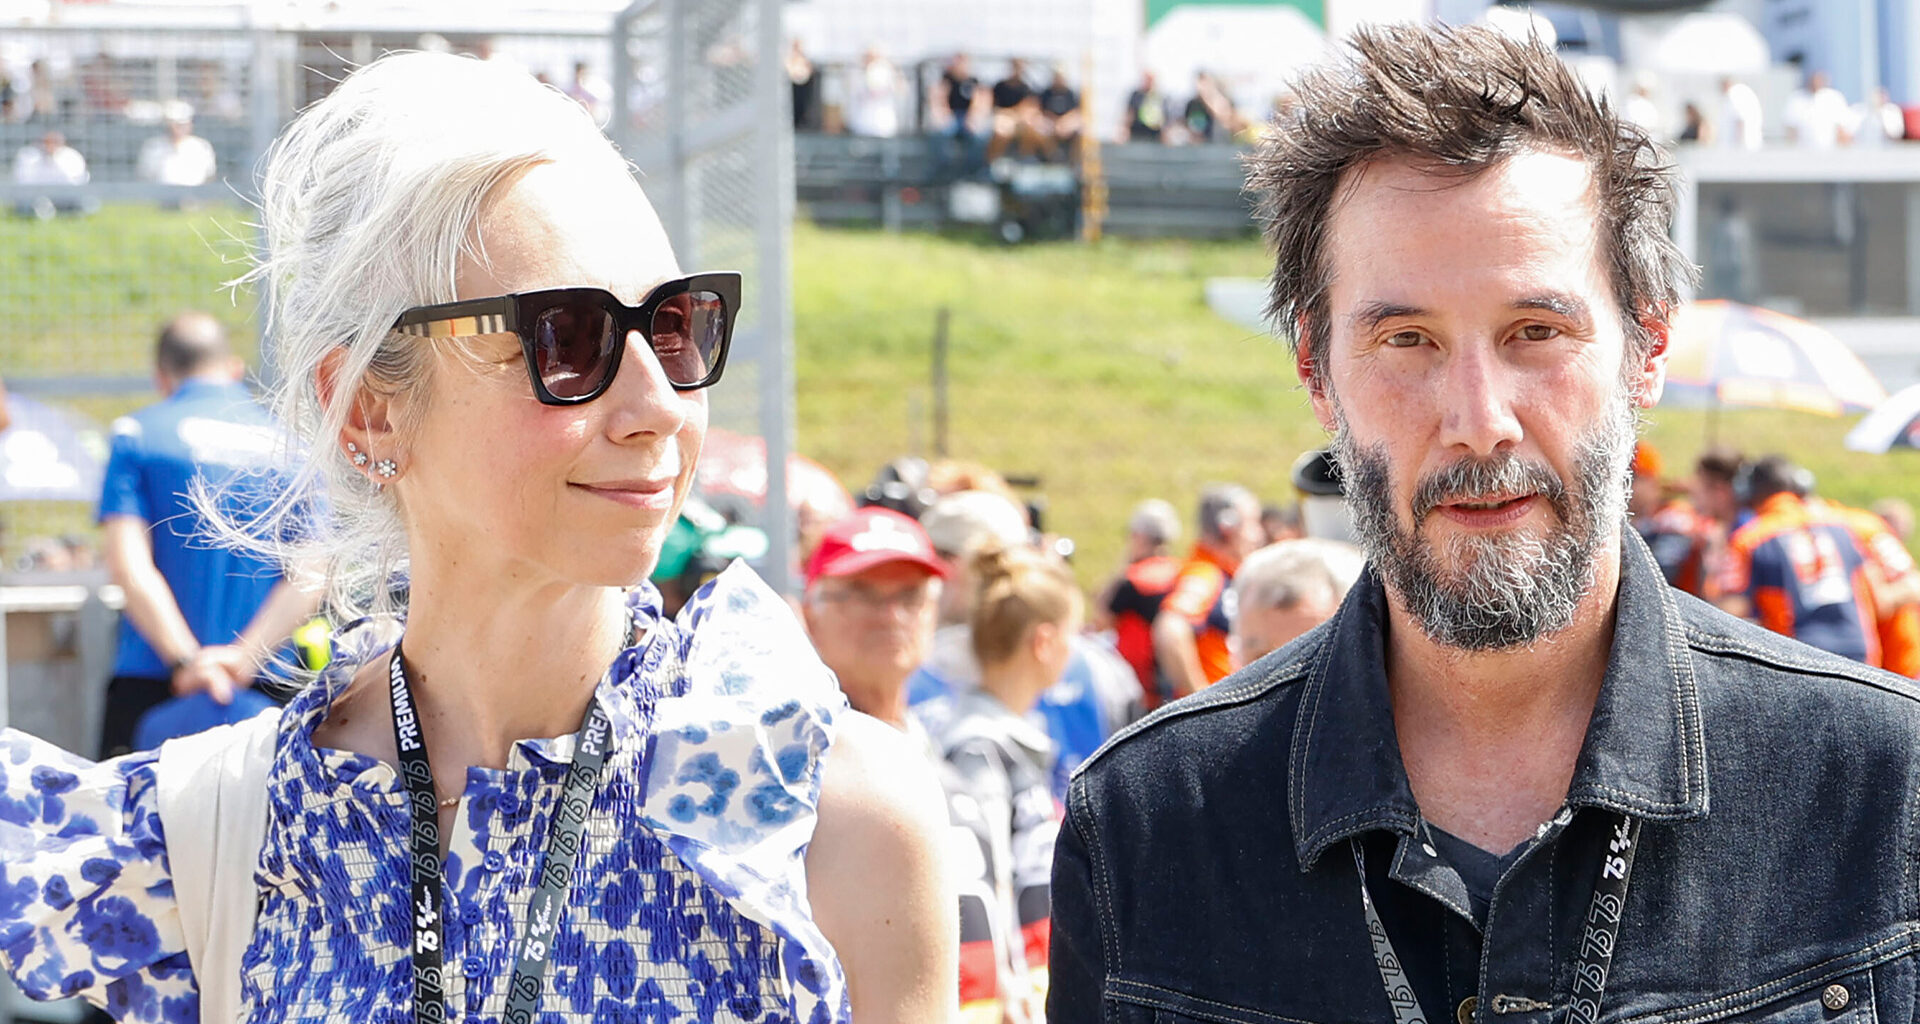 Keanu Reeves seen with gray beard as actor attends Moto GP with rarely-seen girlfriend Alexandra Grant